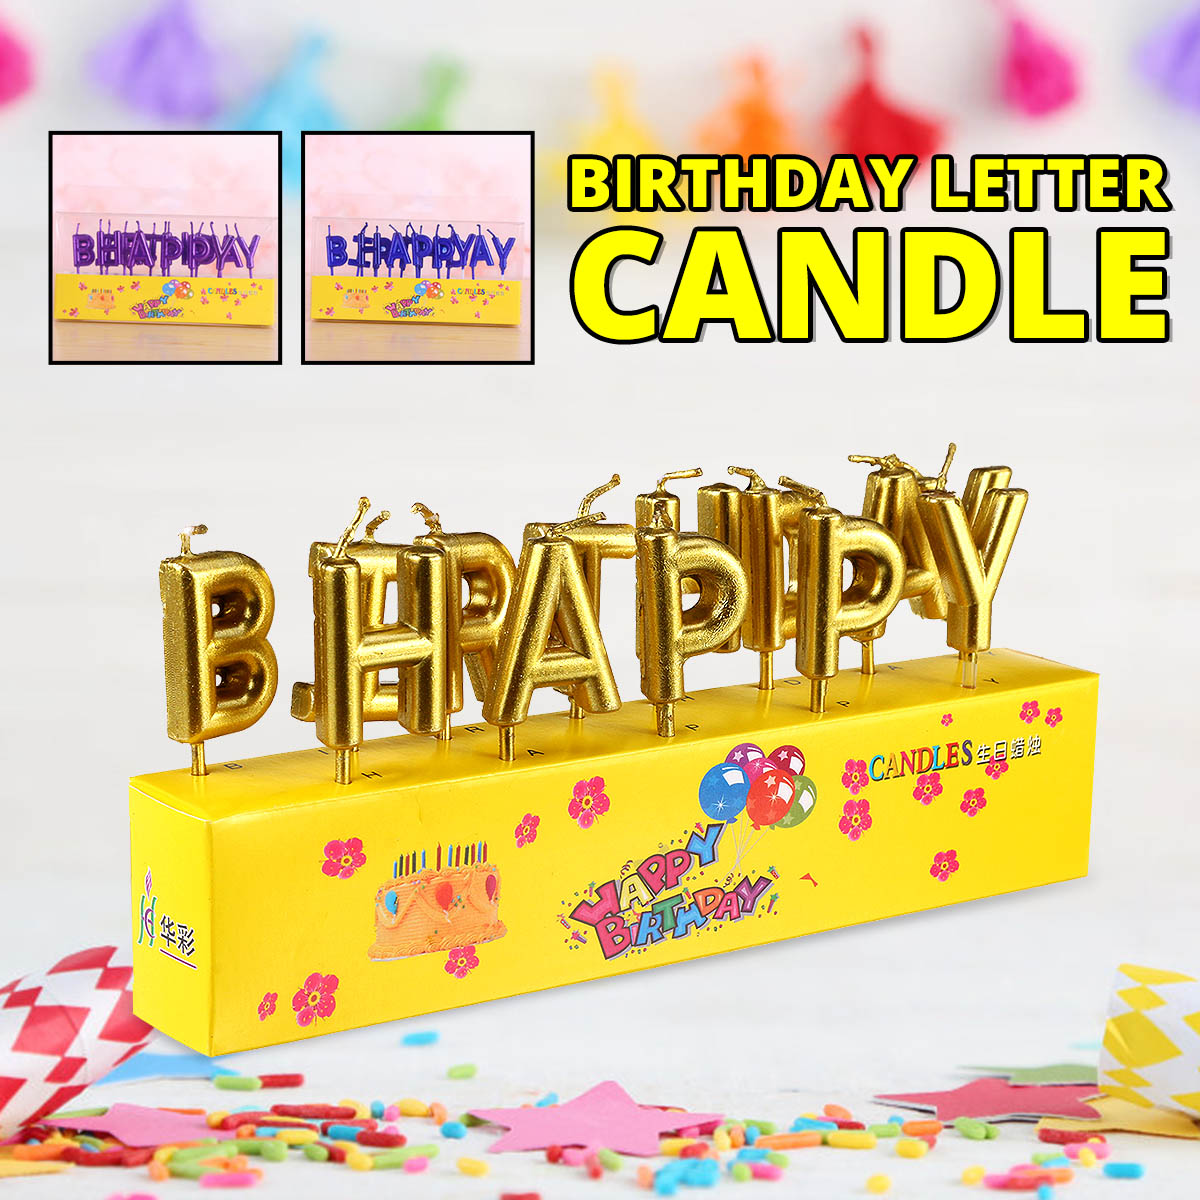 Novelty-Happy-Birthday-Candle-Unscented-Decorative-Wax-Paraffin-Colorful-Candles-for-Party-Cake-Deco-1305443-1